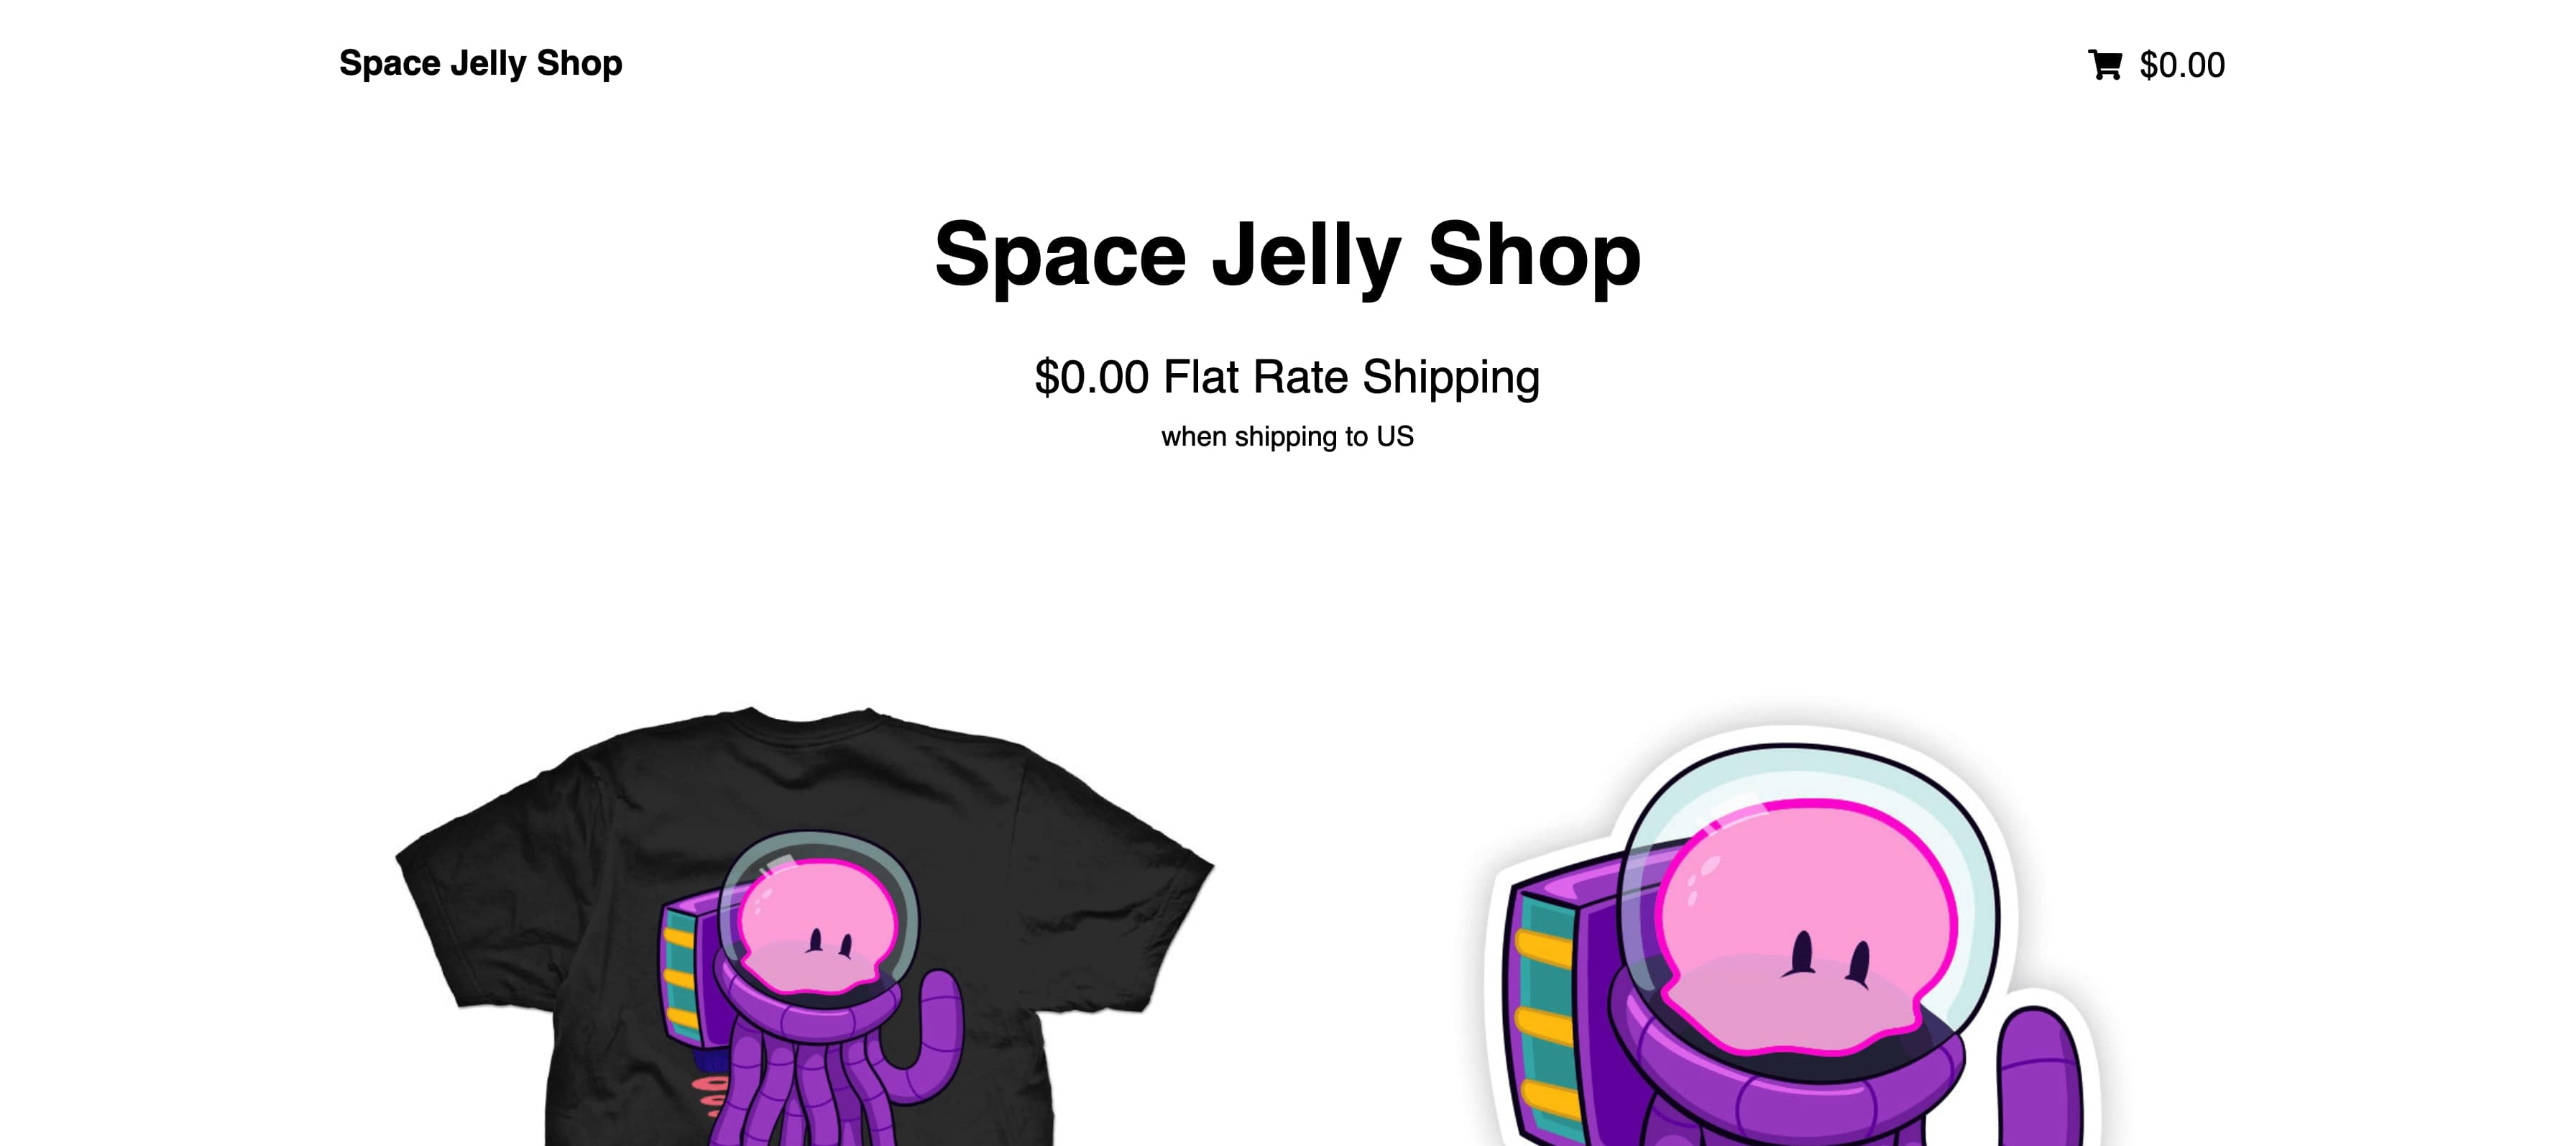 New Space Jelly Shop application with two products and $0.00 shipping rate for the US